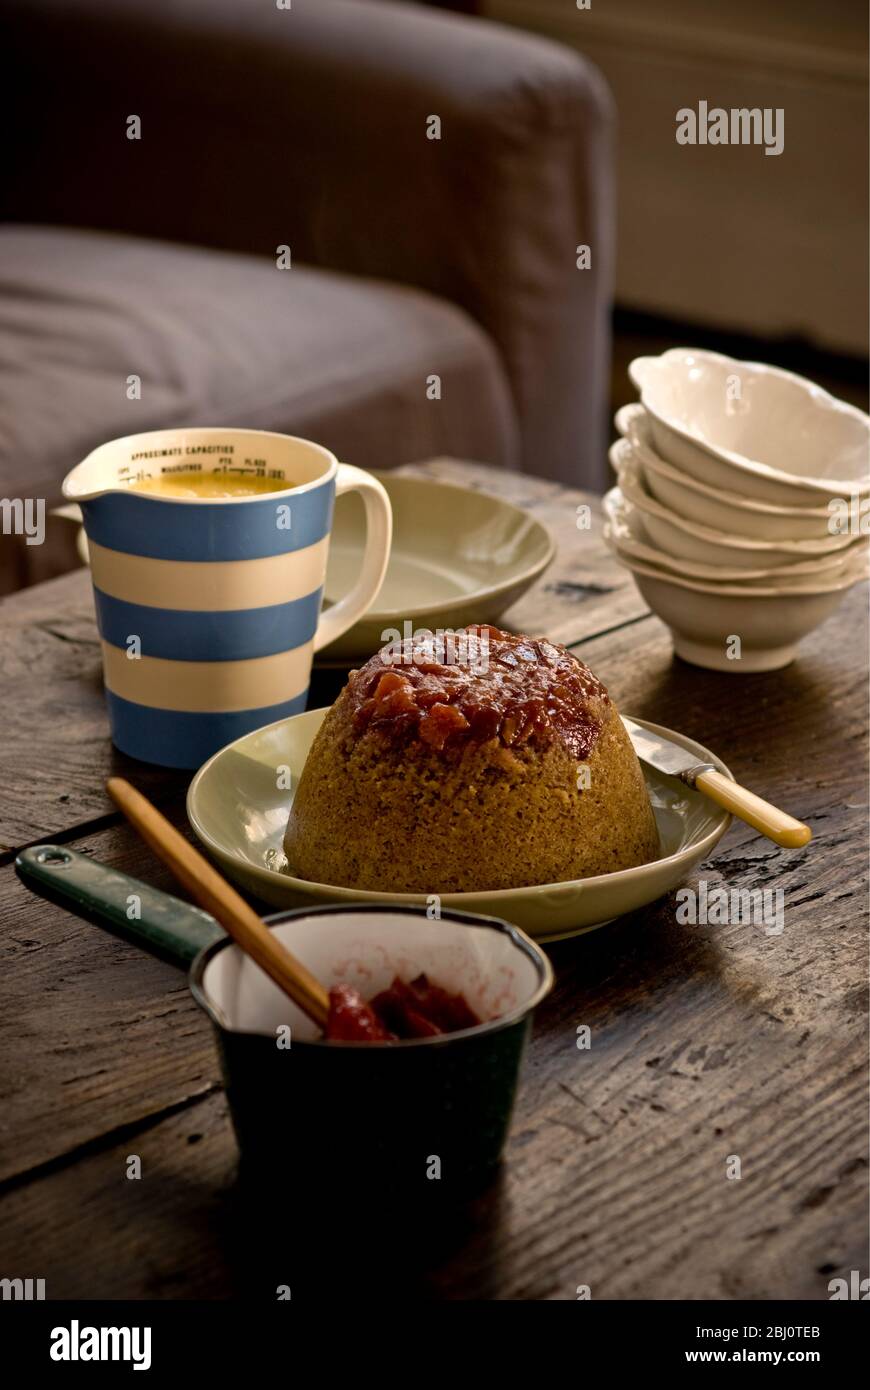 Traditional steamed sponge pudding with walnits and rhubarb compote and custard, served in informal setting - Stock Photo